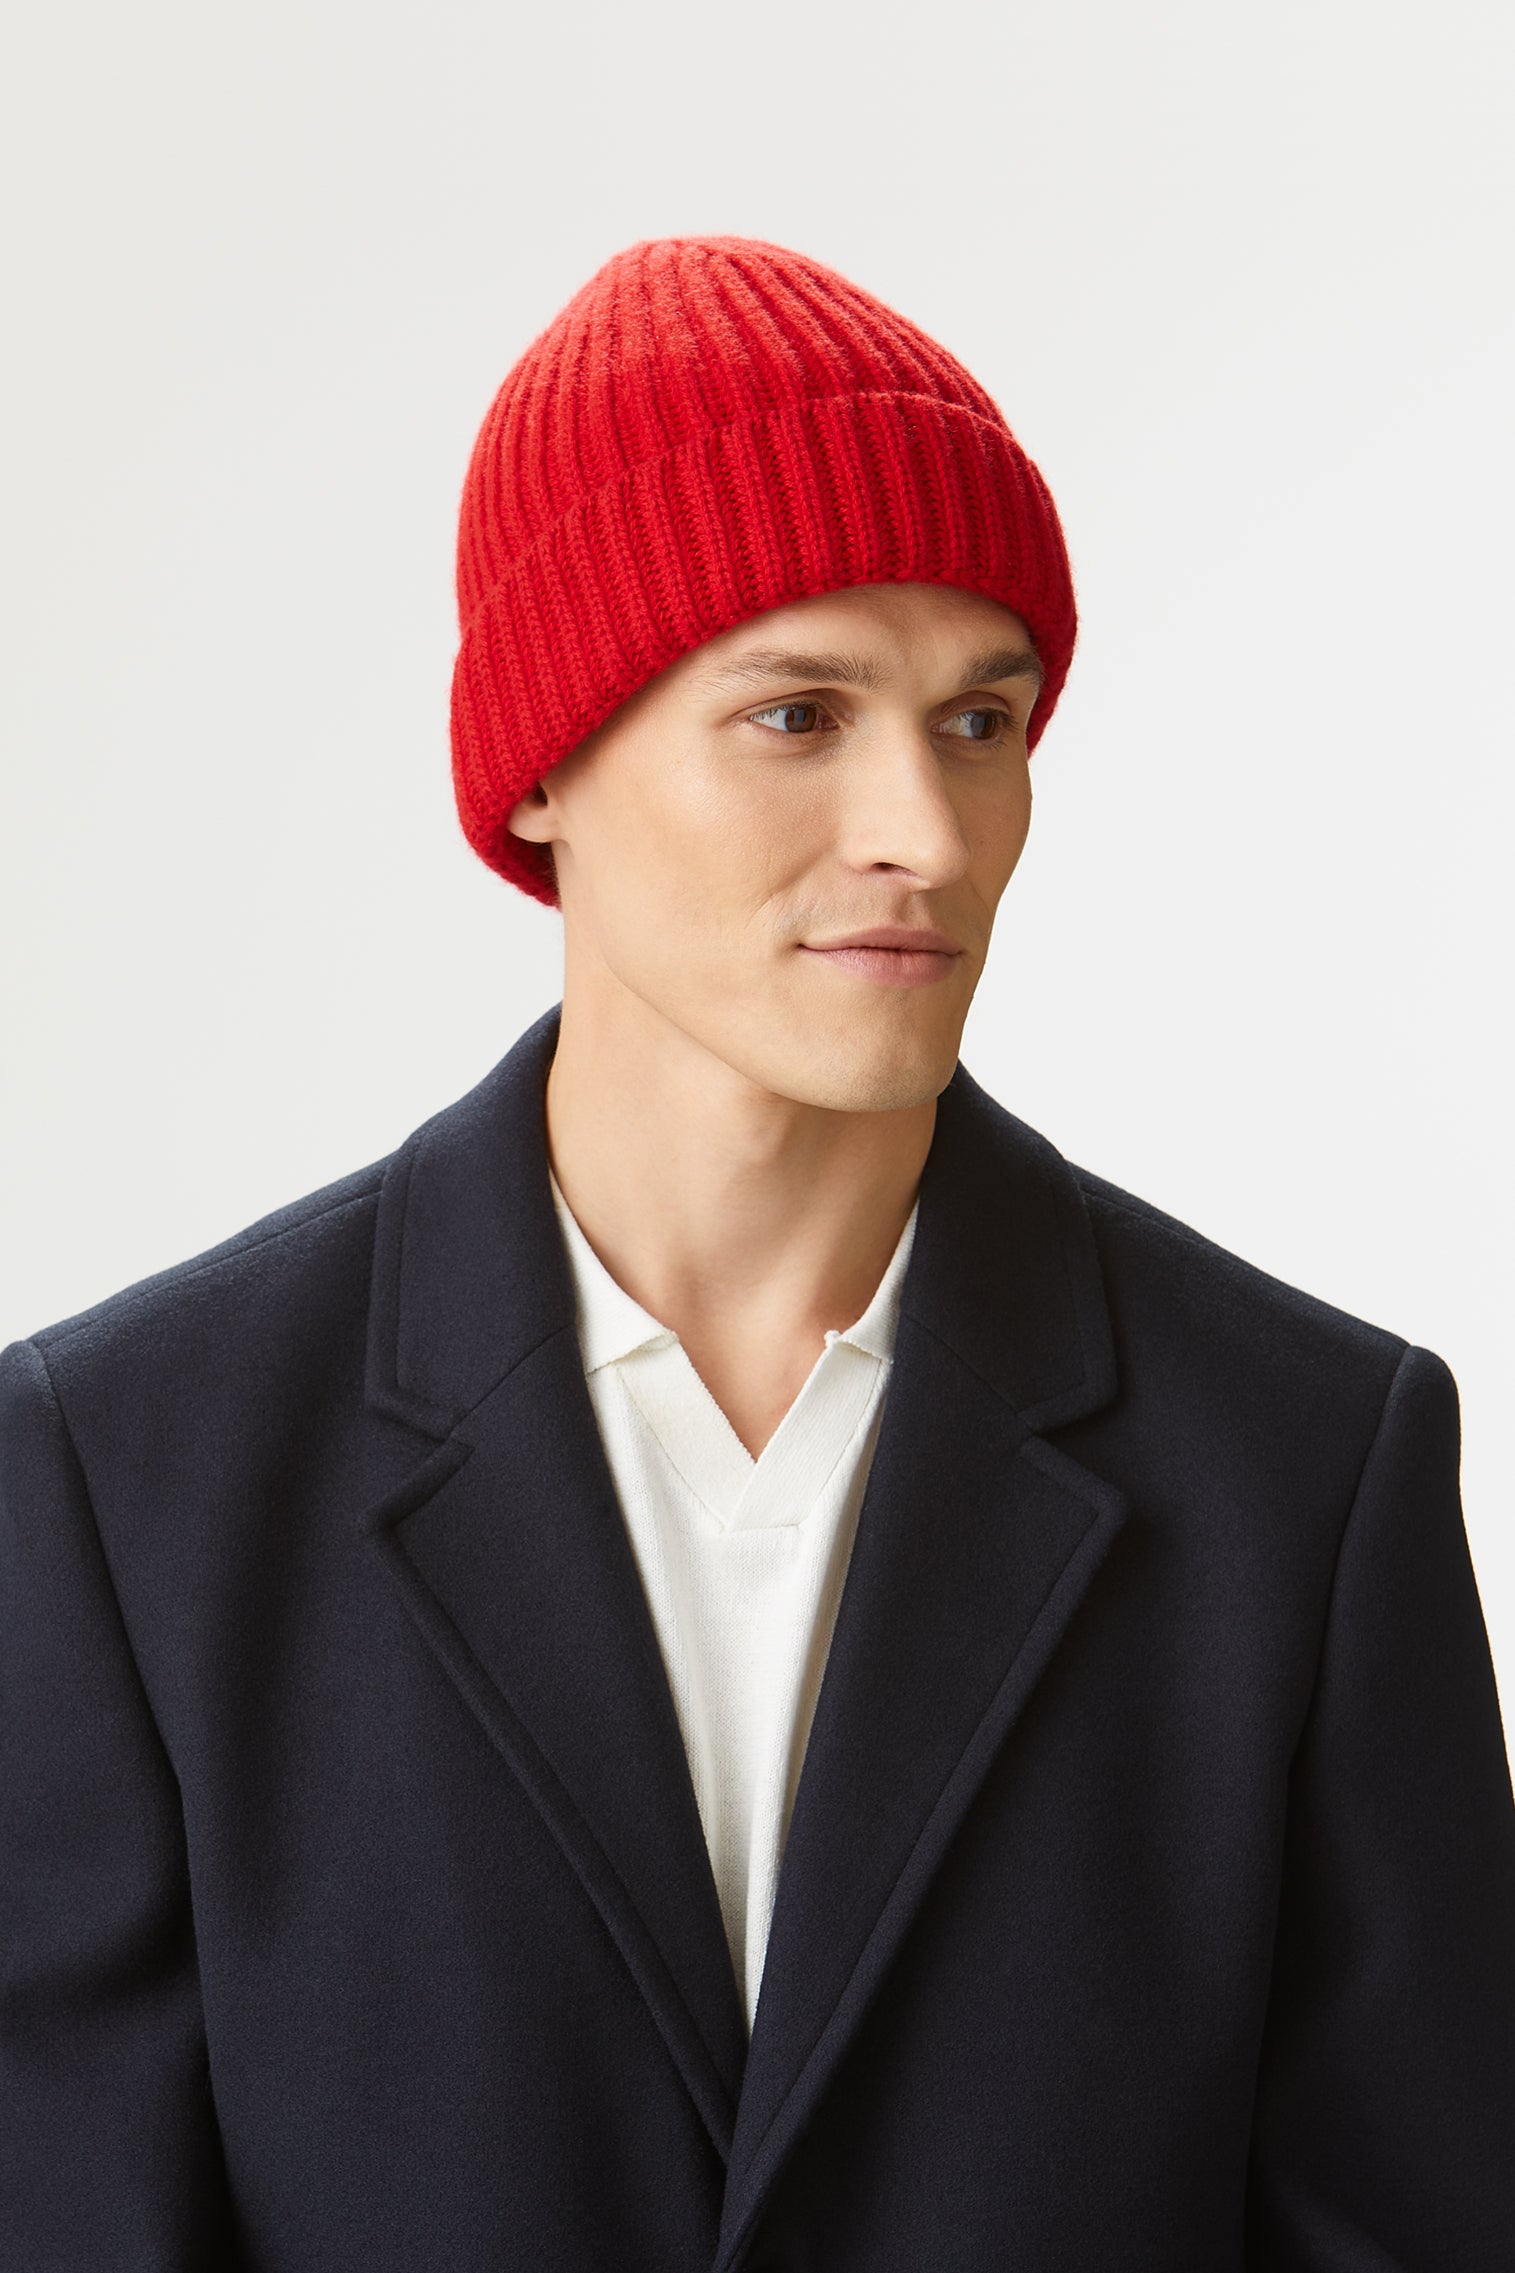 Rannoch Red Cashmere Beanie - Hats for Oval Face Shapes - Lock & Co. Hatters London UK